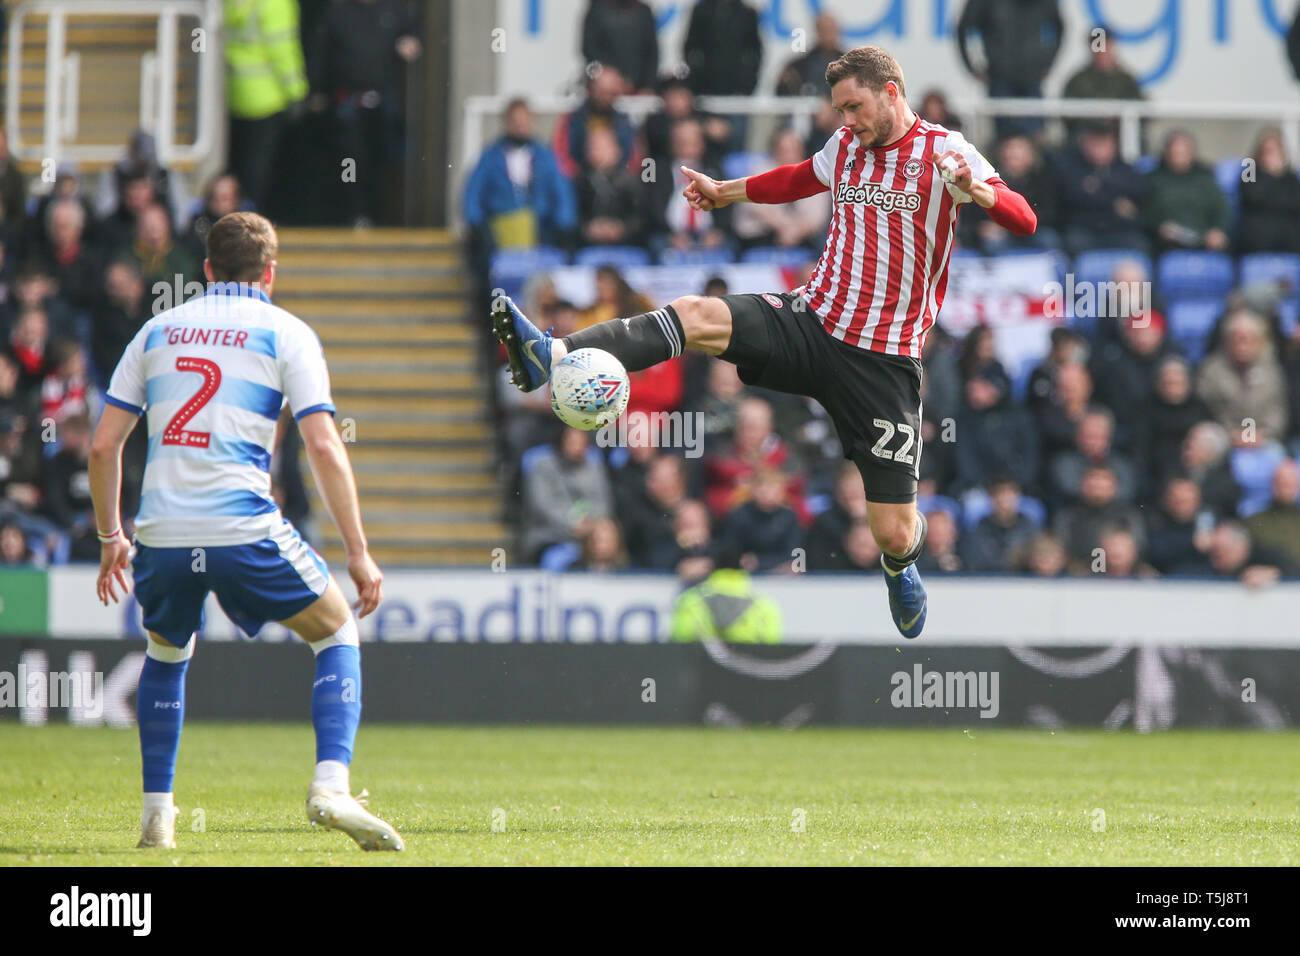 13th April 2019, Madejski Stadium, London, England; Sky Bet Championship, Reading vs Brentford ; Henrik Dalsgaard (22) of Brentford controls the ball during the game  Credit: Matt O'Connor/News Images,  English Football League images are subject to DataCo Licence Stock Photo